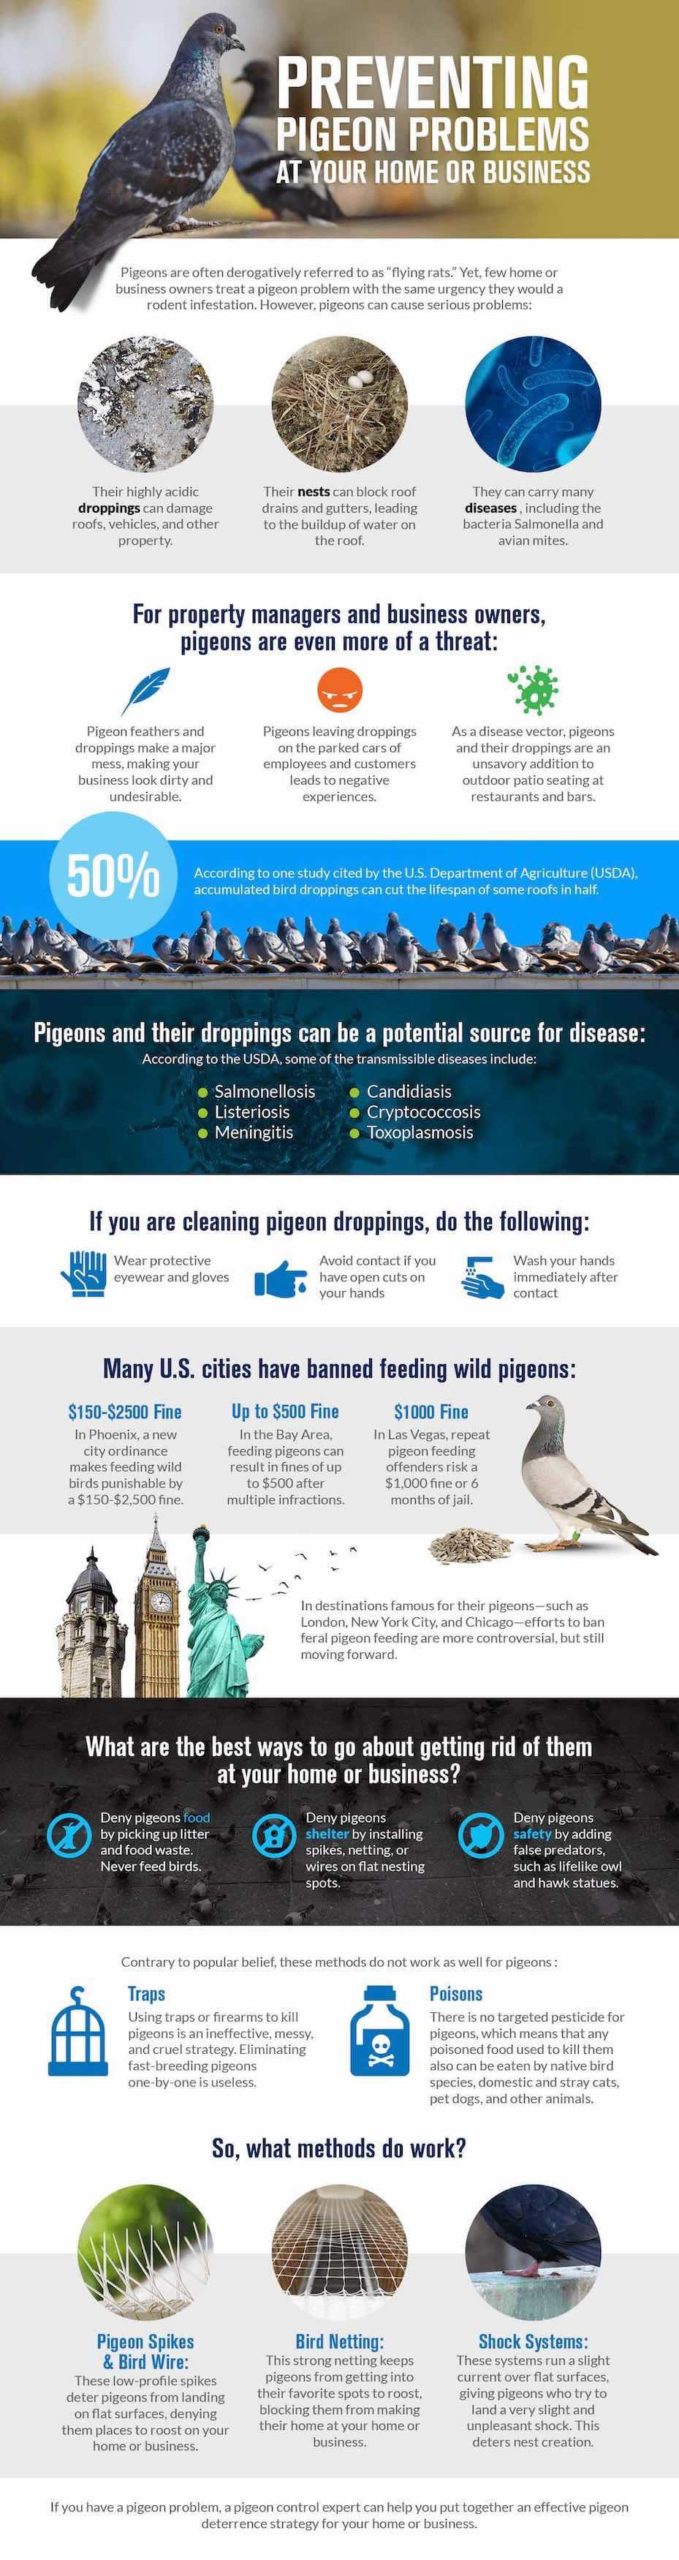 This infographic outlines several ways that homeowners and businesses can humanely get rid of their pigeon infestations.